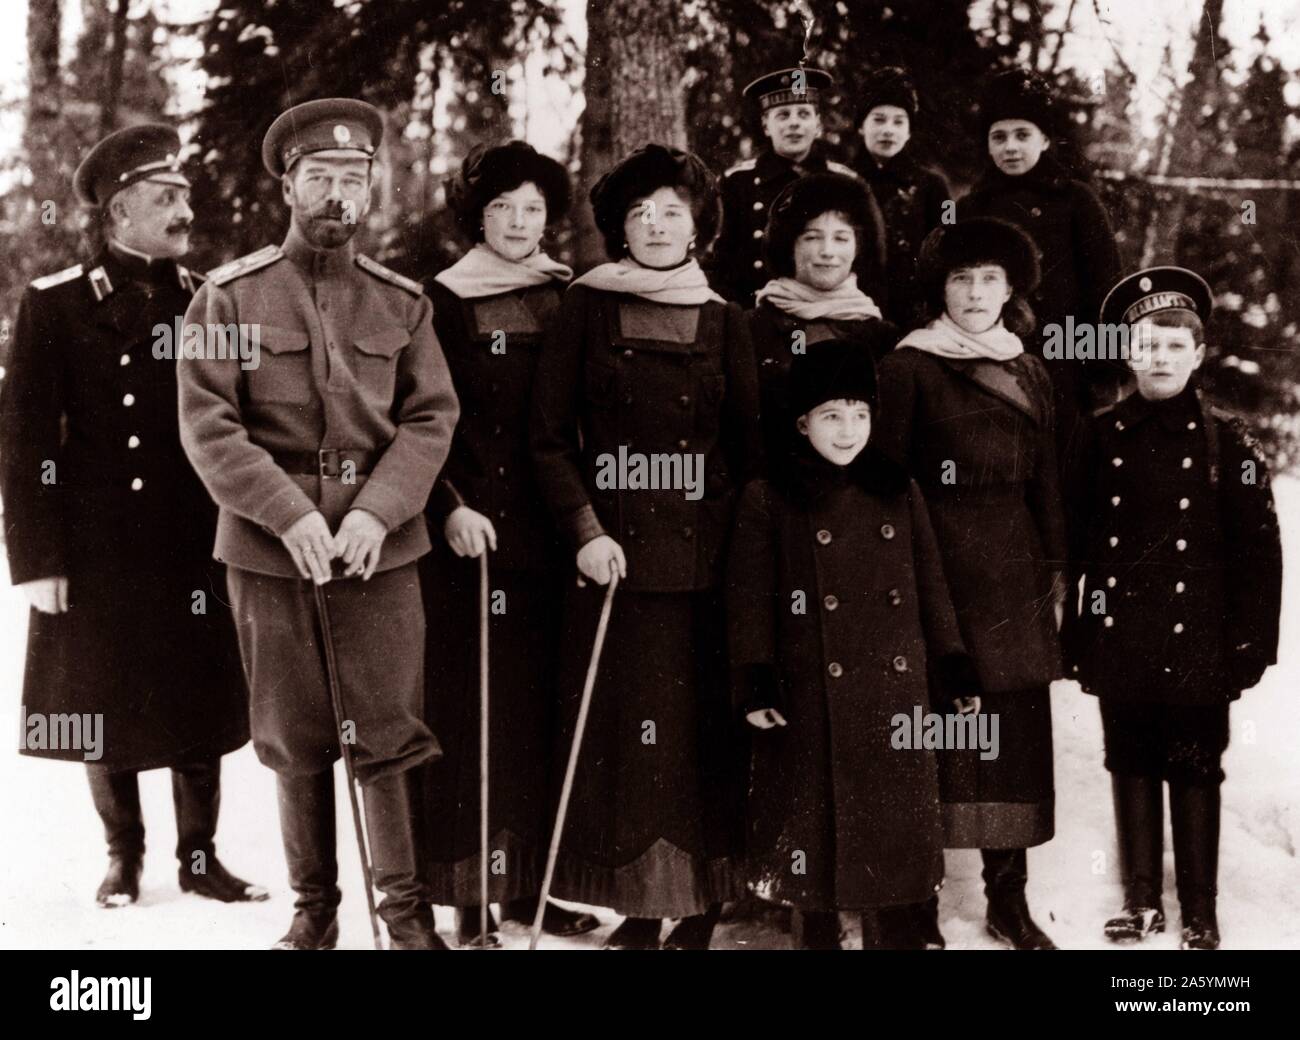 Photograph of Tsar Nicholas II from the Russian Royal Family. around the time of his abdication in March 1917. The image shows the Romanovs stood outdoors at Tsarskoye Selo, Russia. Photographed circa 1916-1917. Stock Photo